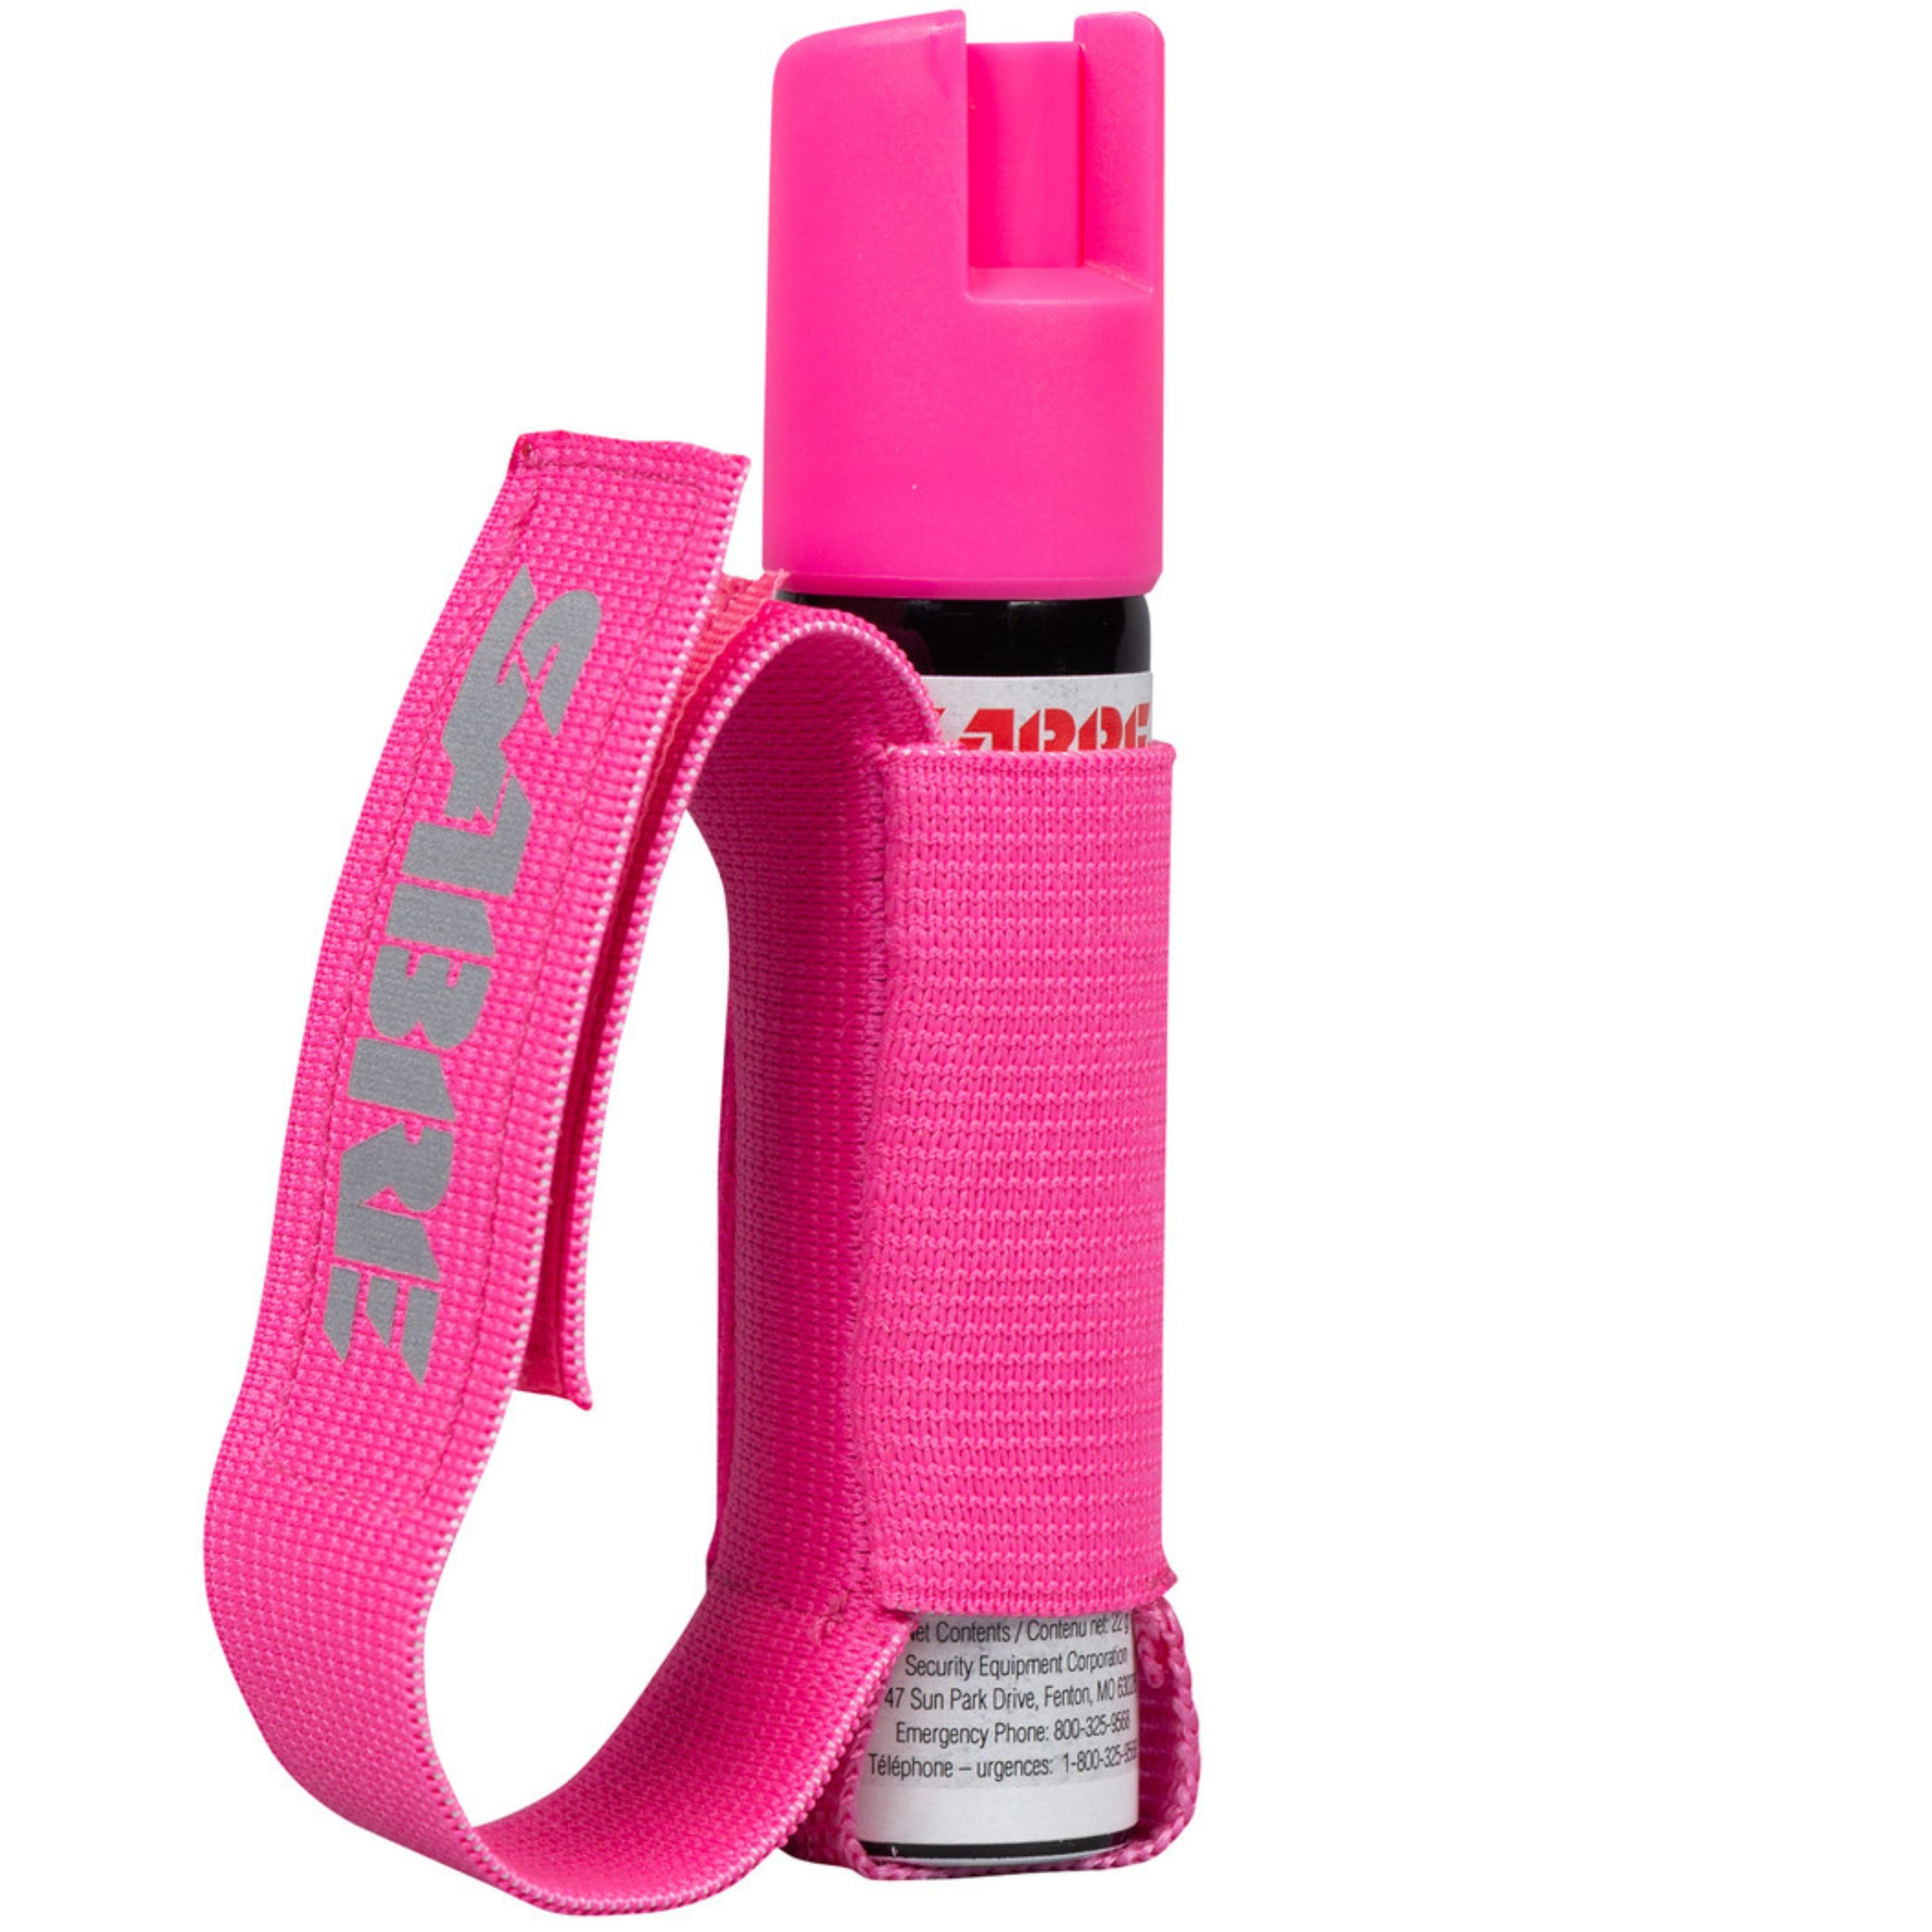 Deterrent pepper for dog attacks with hand strap - Pink